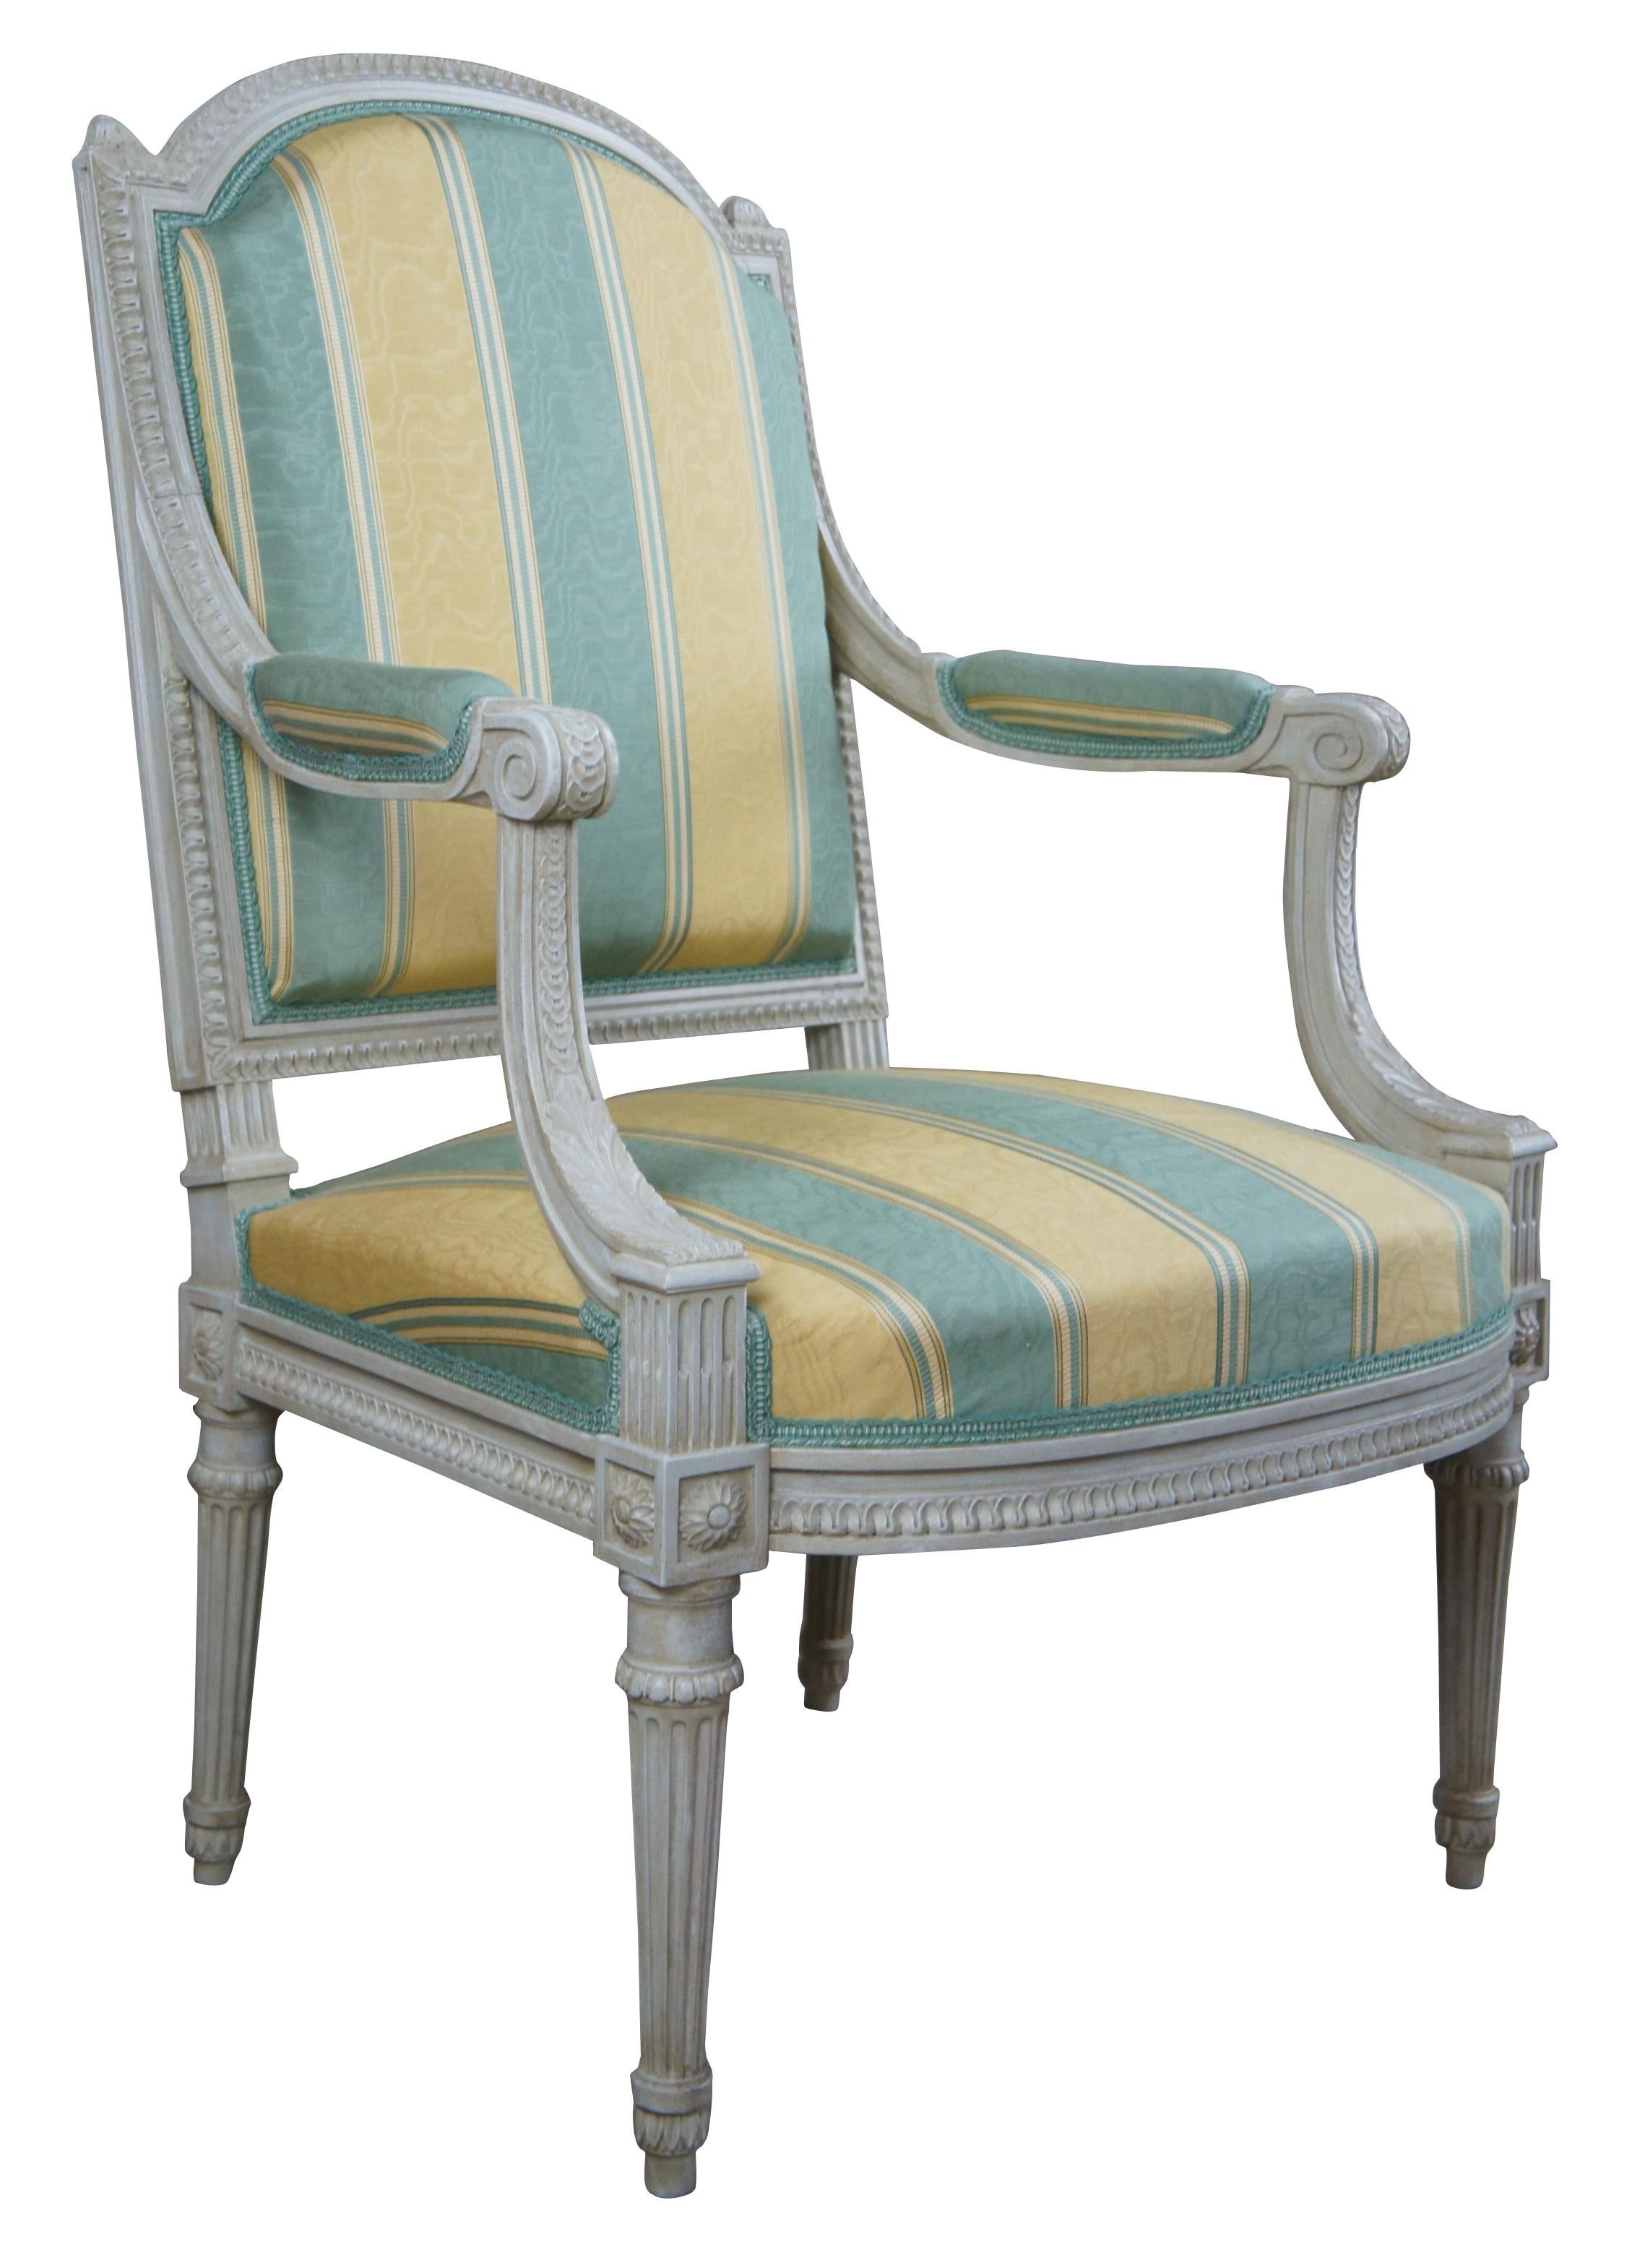 Vintage Baker Furniture Louis XVI / French Provincial Feuteuil armchair featuring tulip and acanthus accents, a domed back with finials, upholstered arms and tapered fluted legs. The chair is upholstered in a green and yellow silk striped fabric